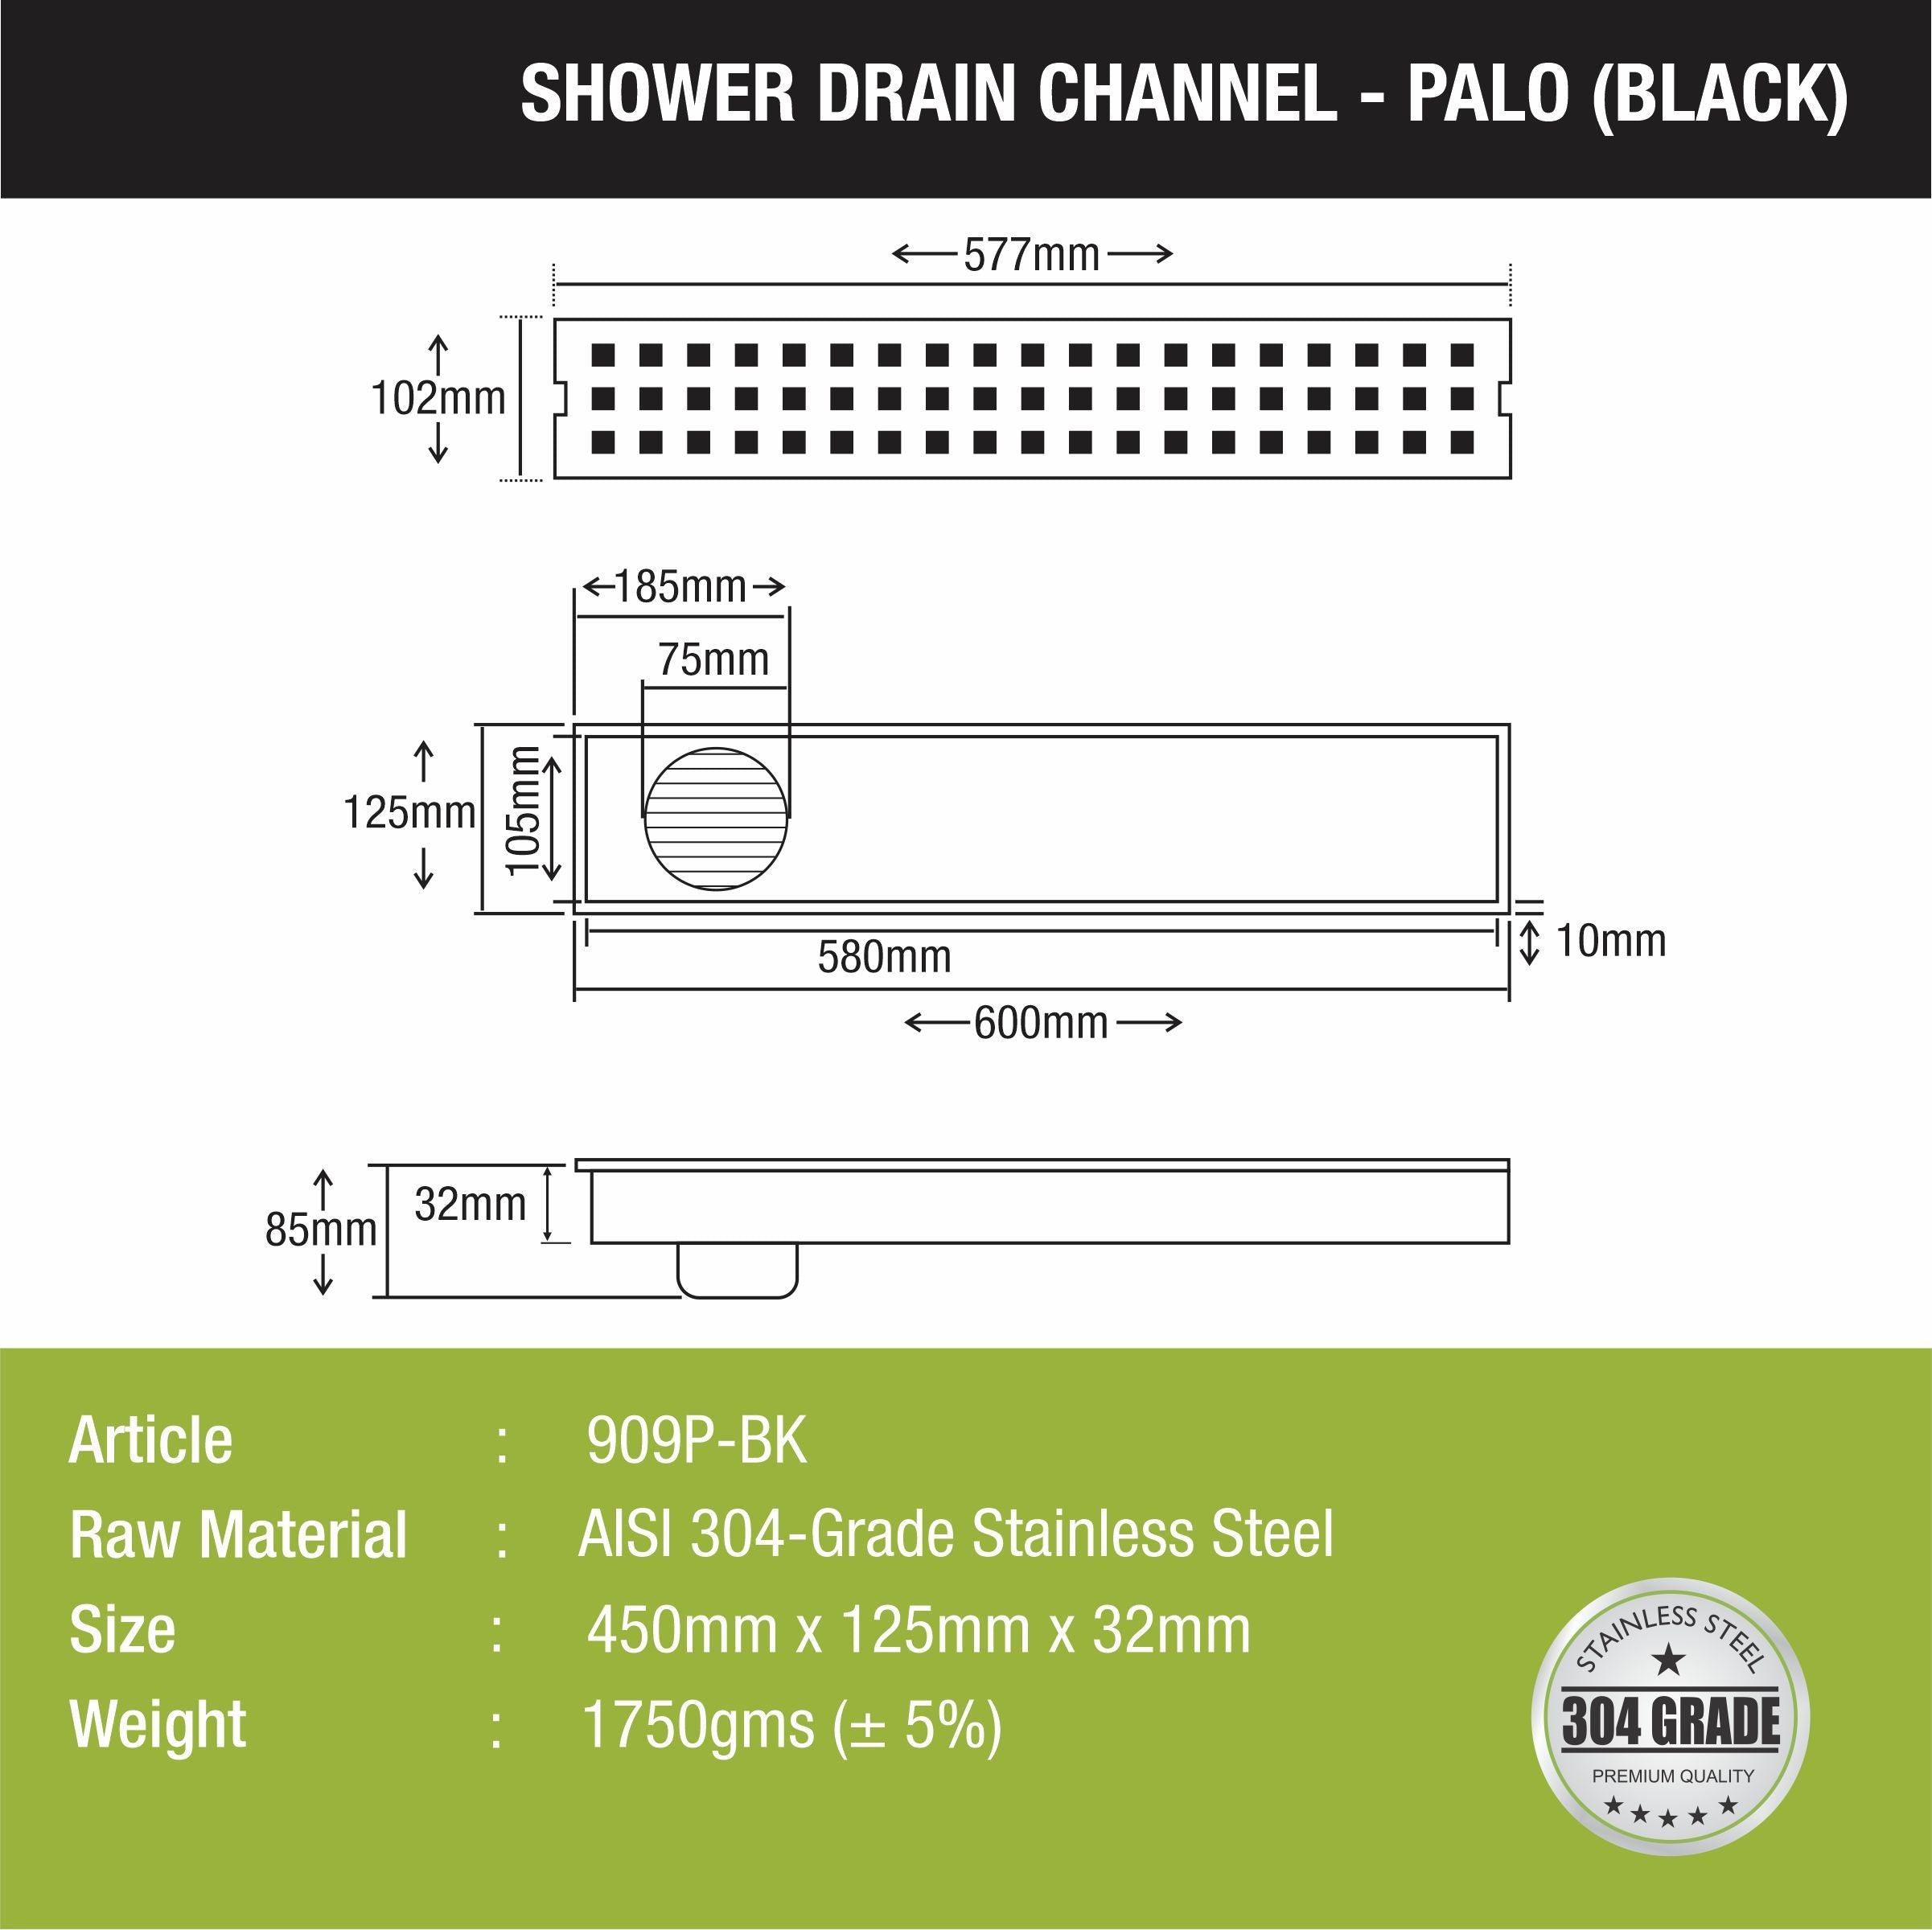 Palo Shower Drain Channel - Black (24 x 5 Inches) size and measurment